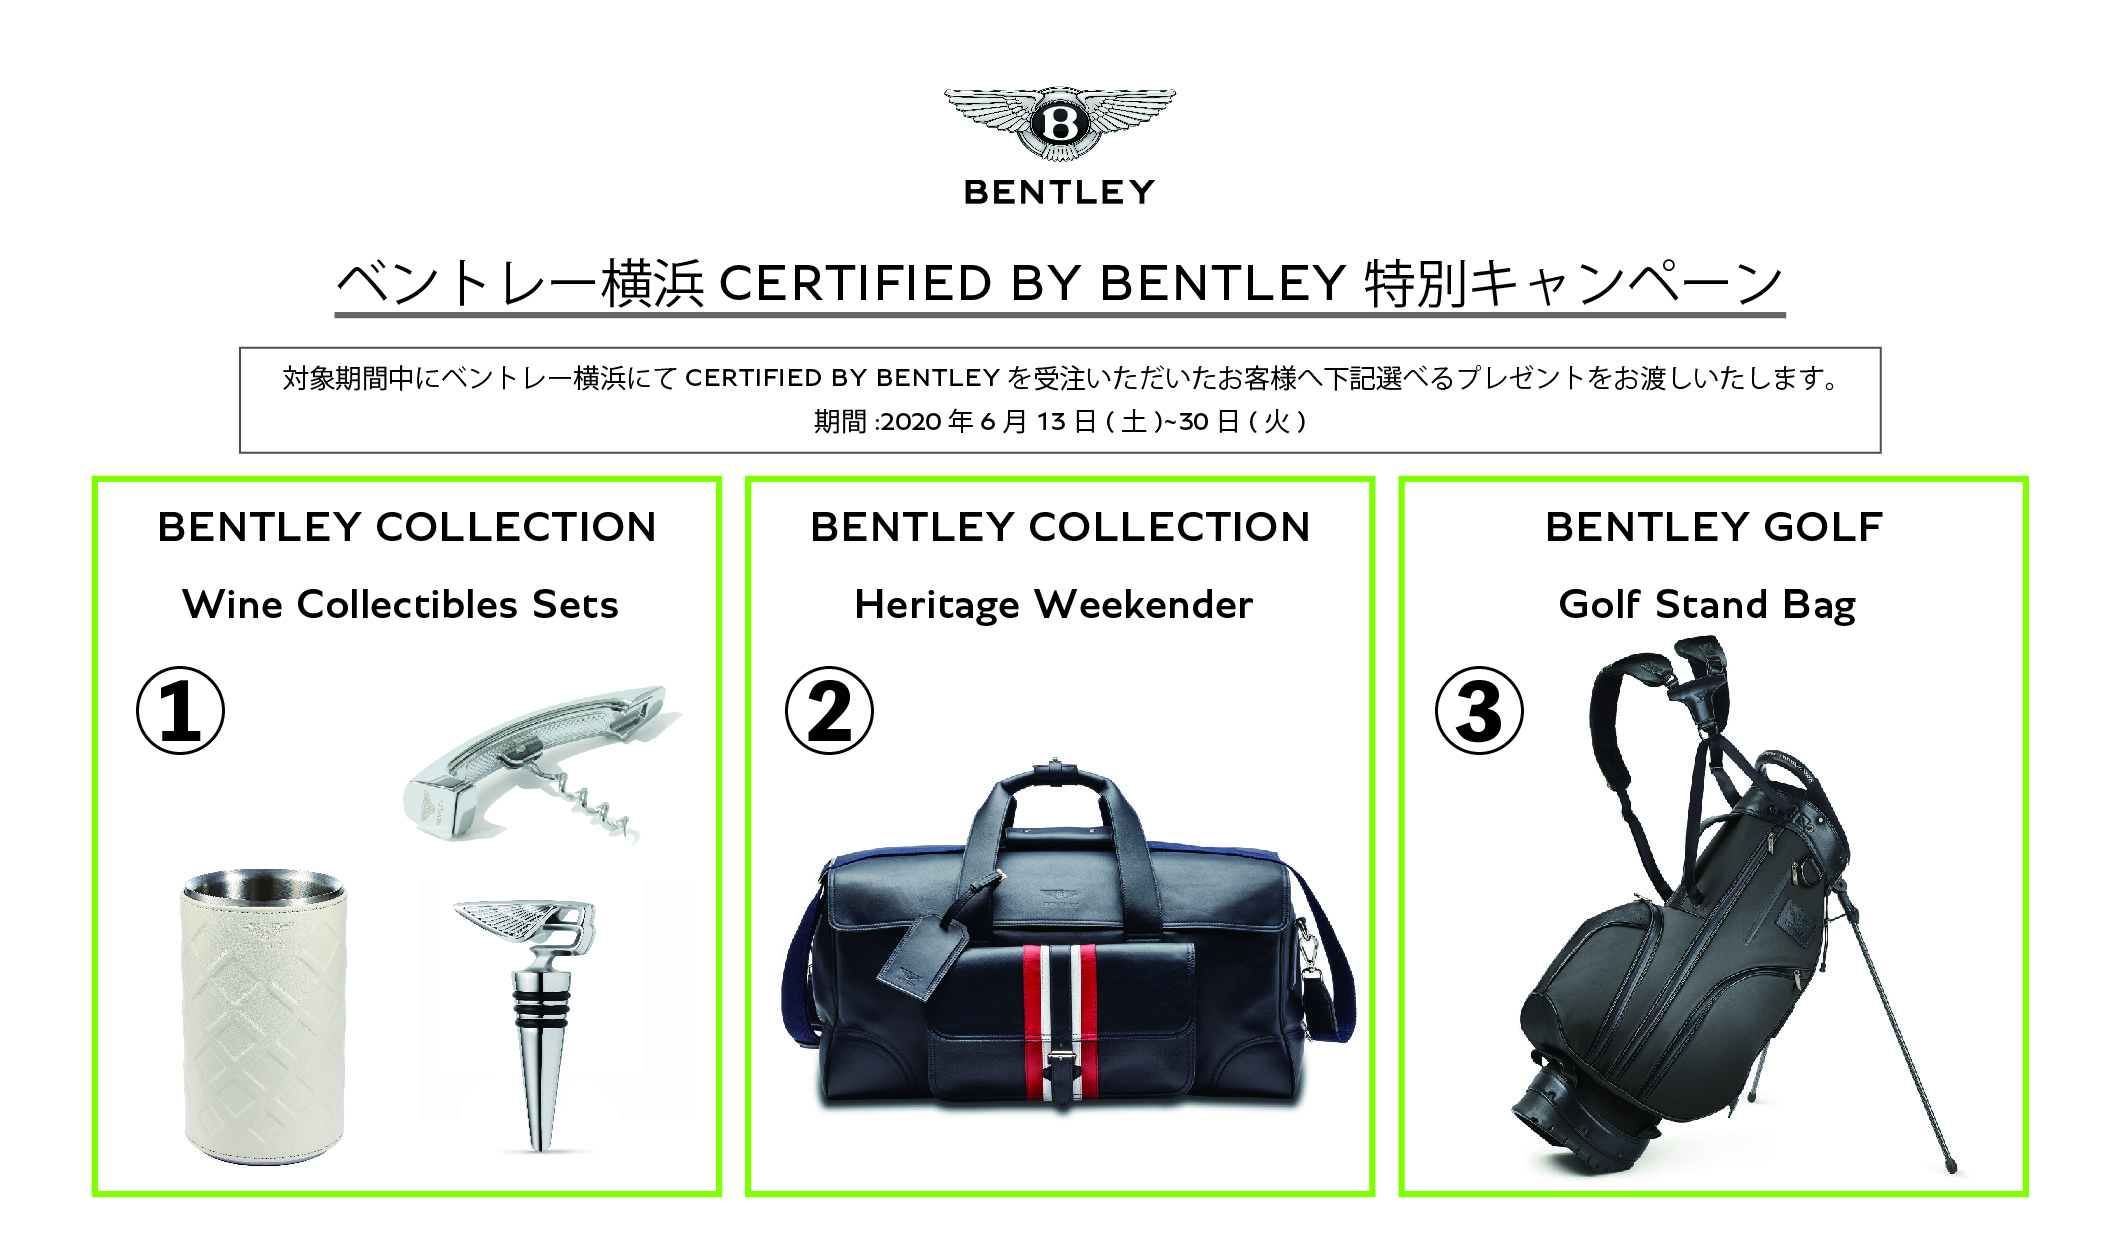 【Special Offer】期間限定！CERTIFIED BY BENTLEY特別キャンペーン